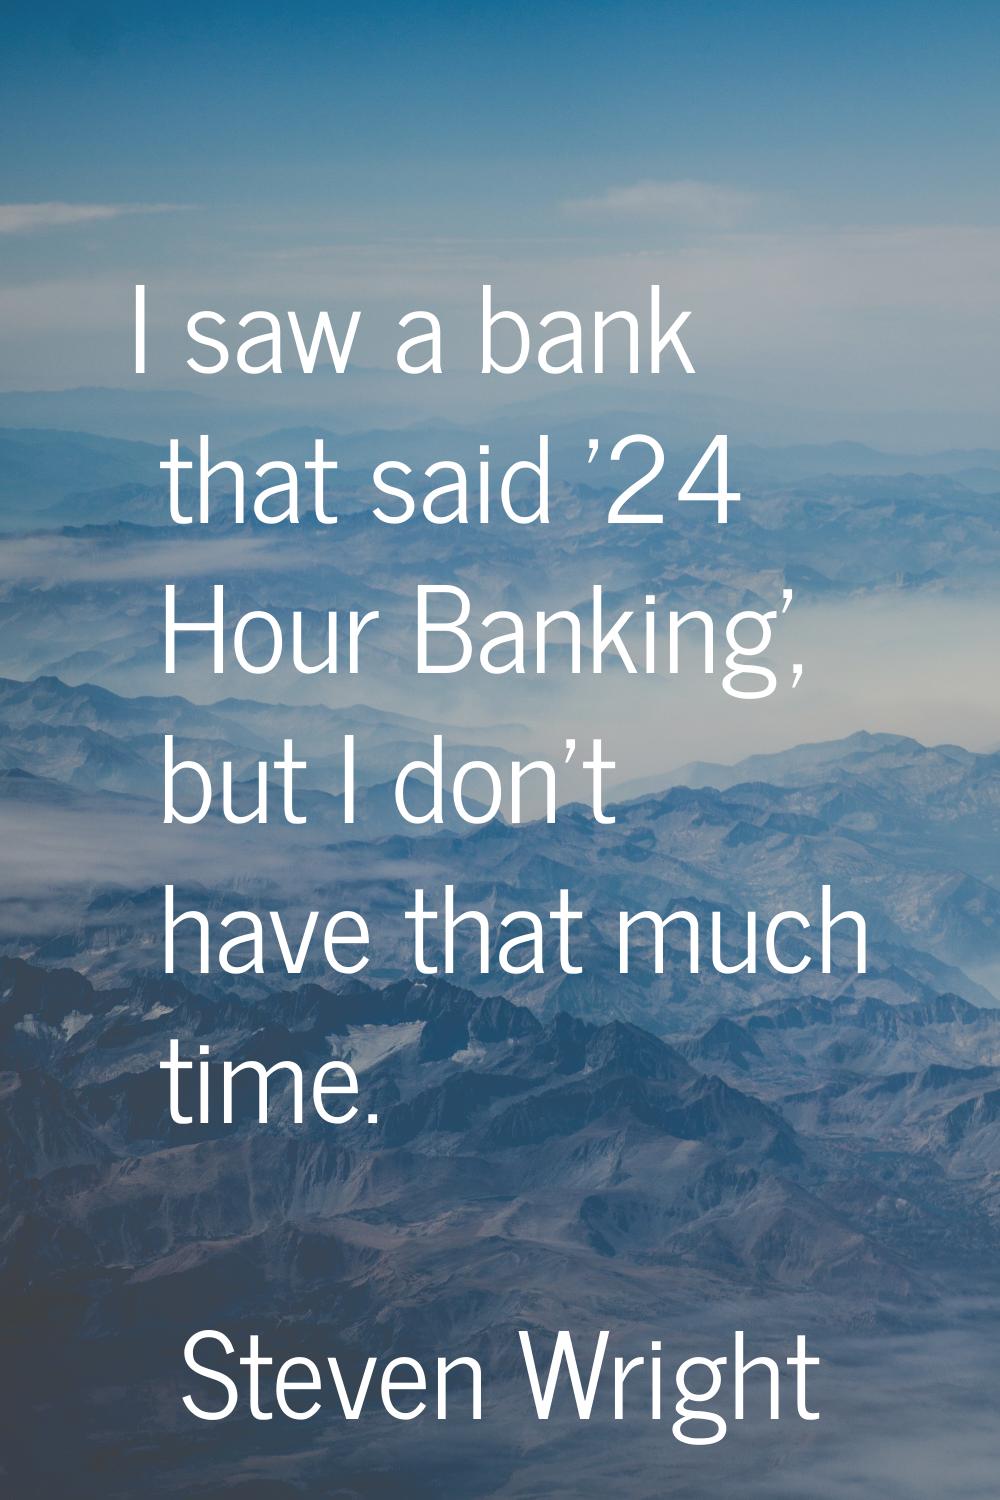 I saw a bank that said '24 Hour Banking', but I don't have that much time.